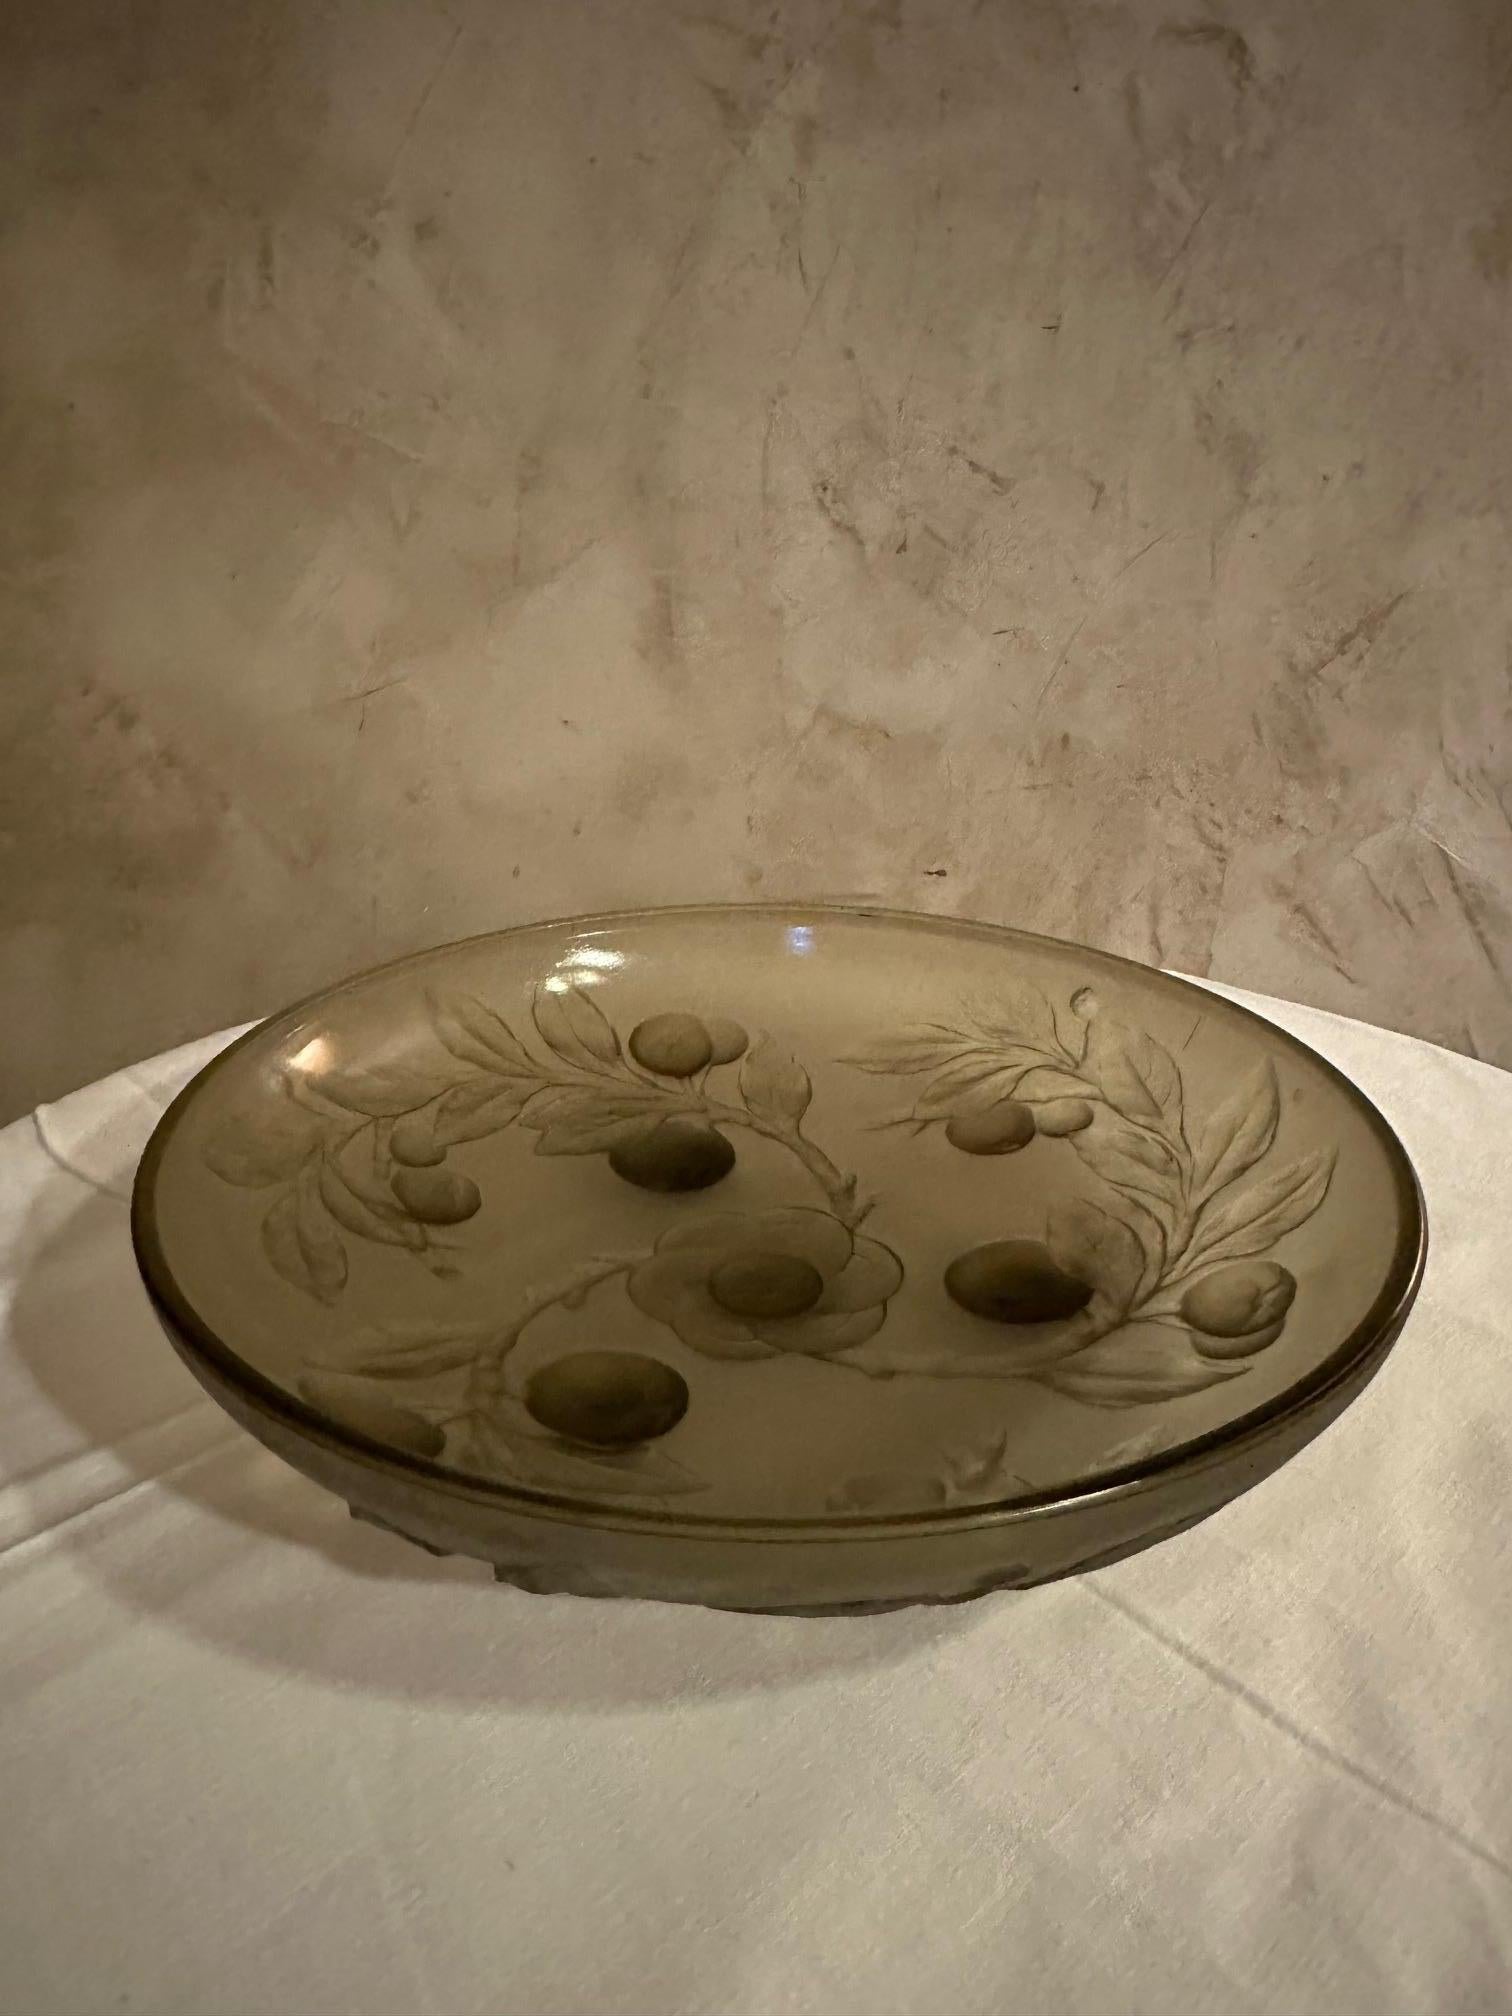 Large sandblasted glass fruit bowl with embossed flower and fruit motif. 1930s art deco style. Good quality and good condition.